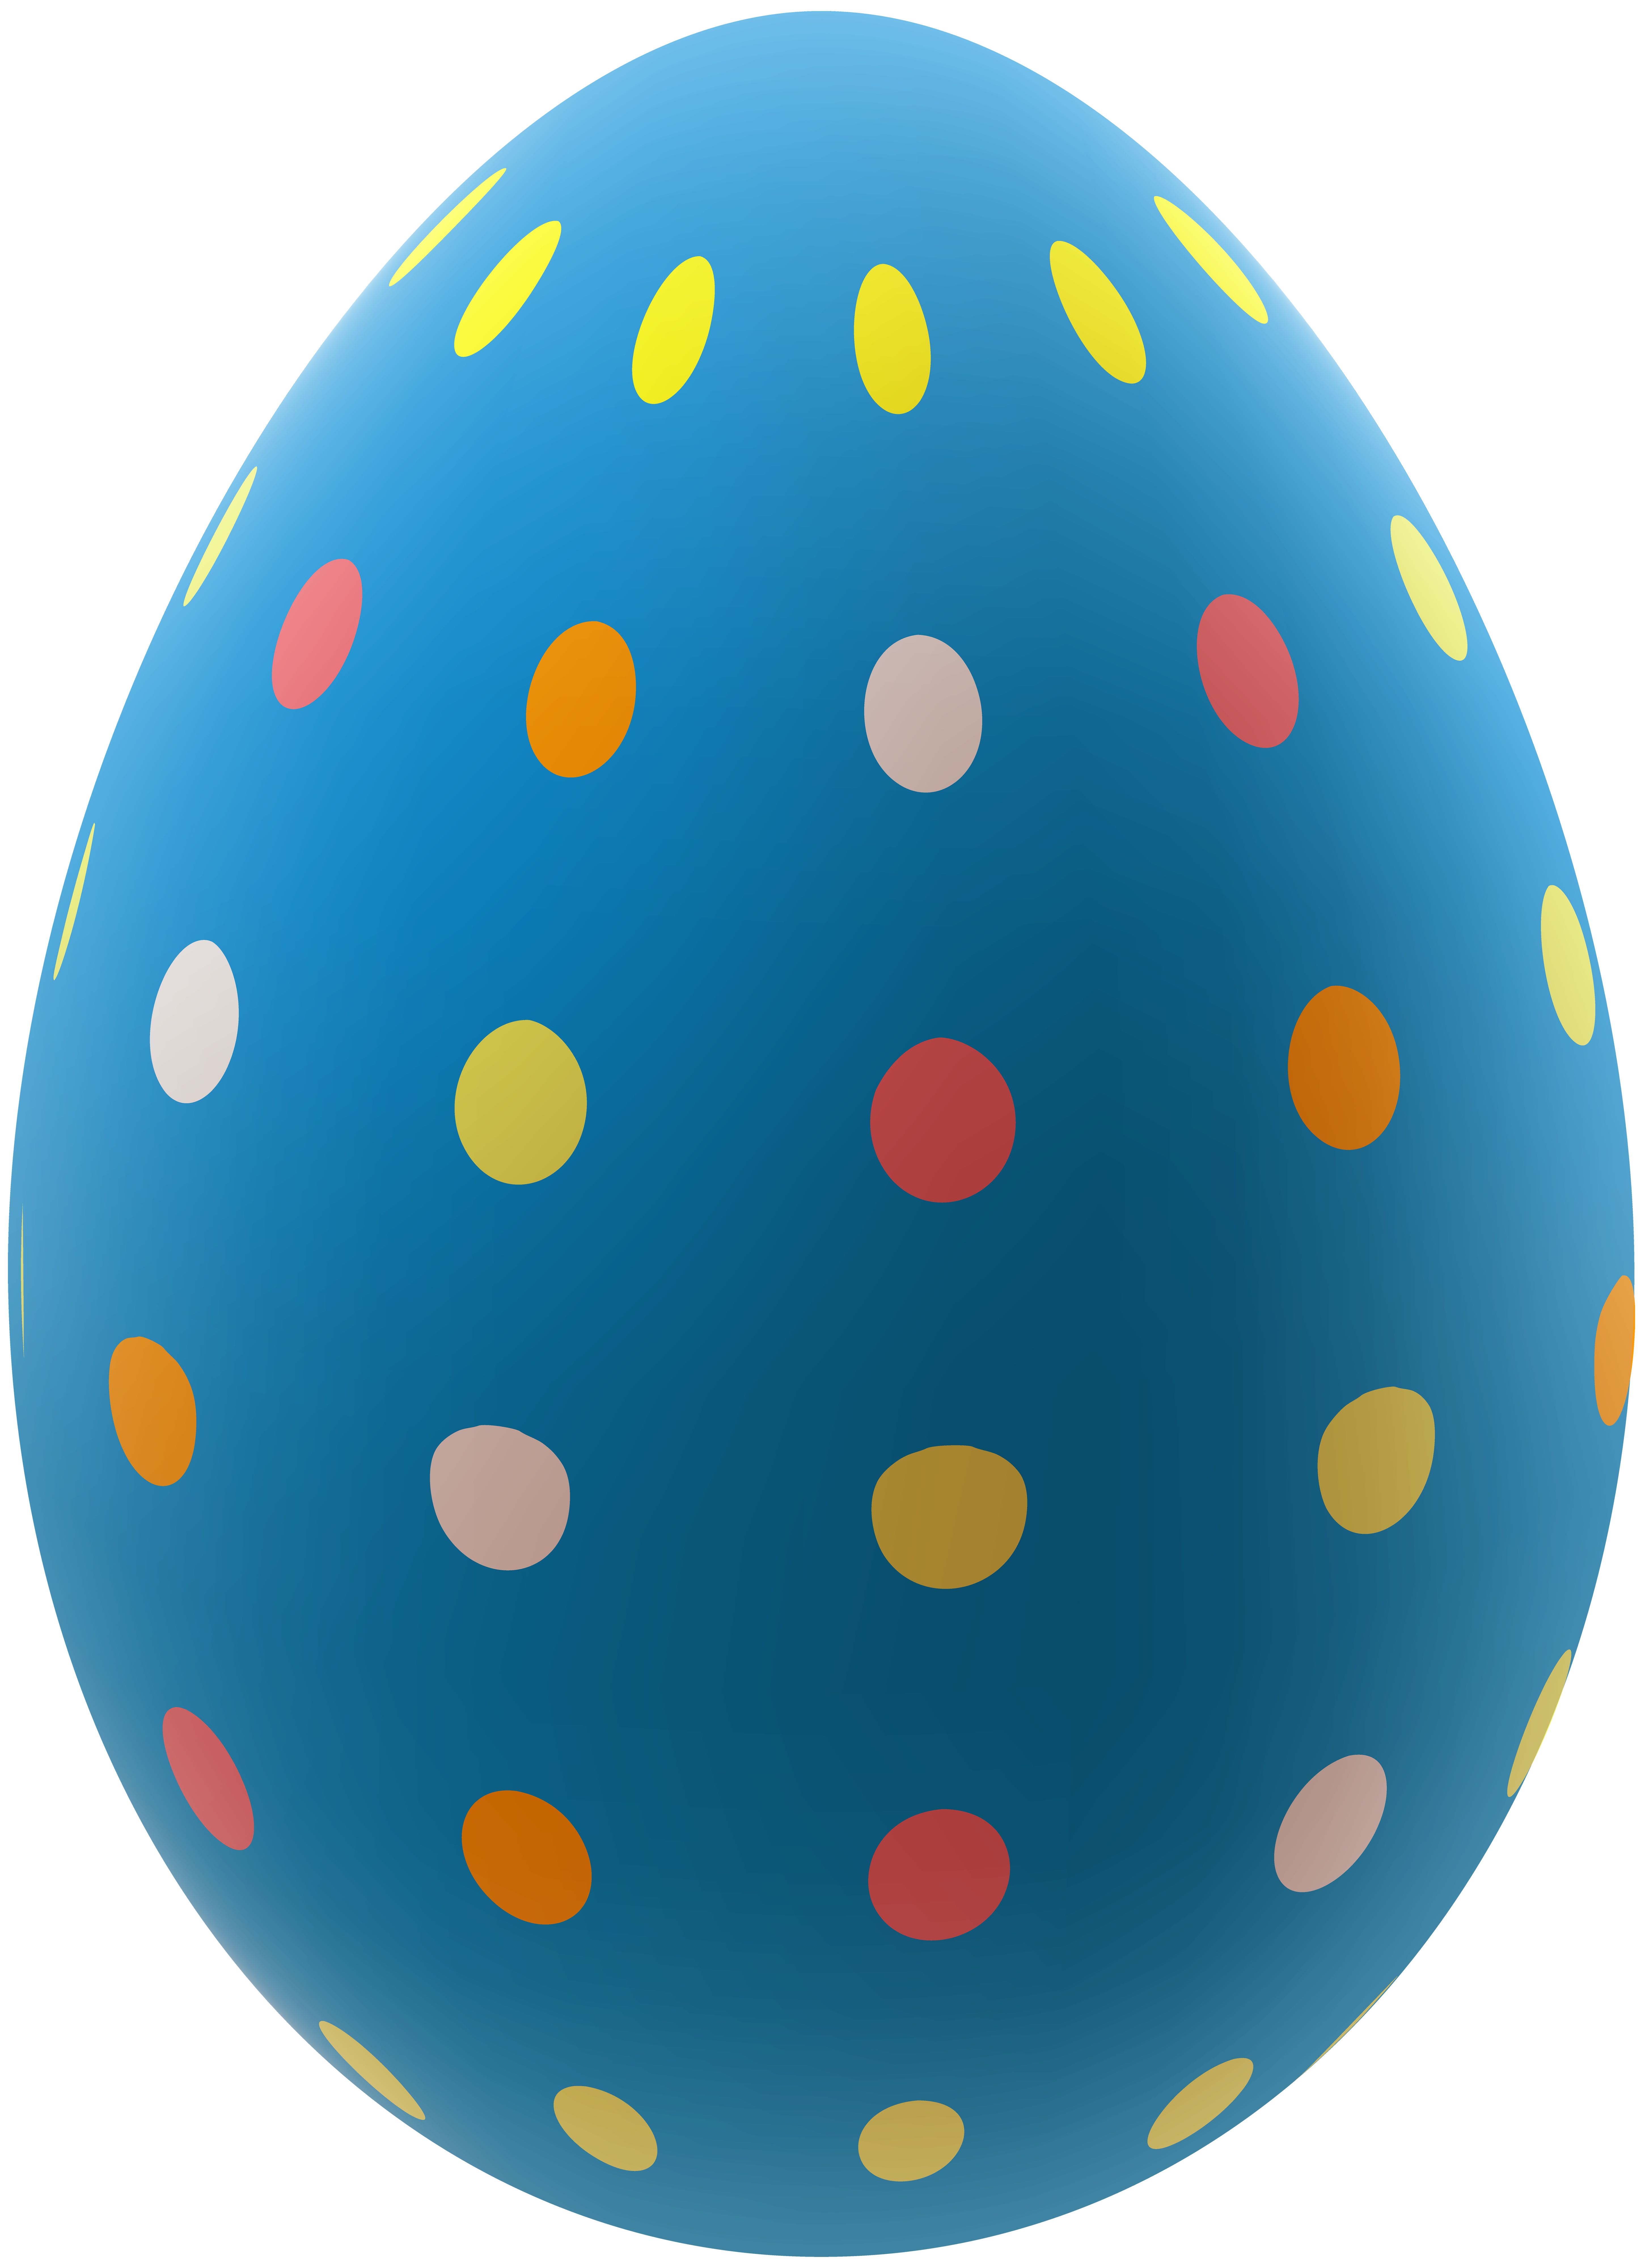 Easter Eggs PNG Transparent Images Free Download, Vector Files